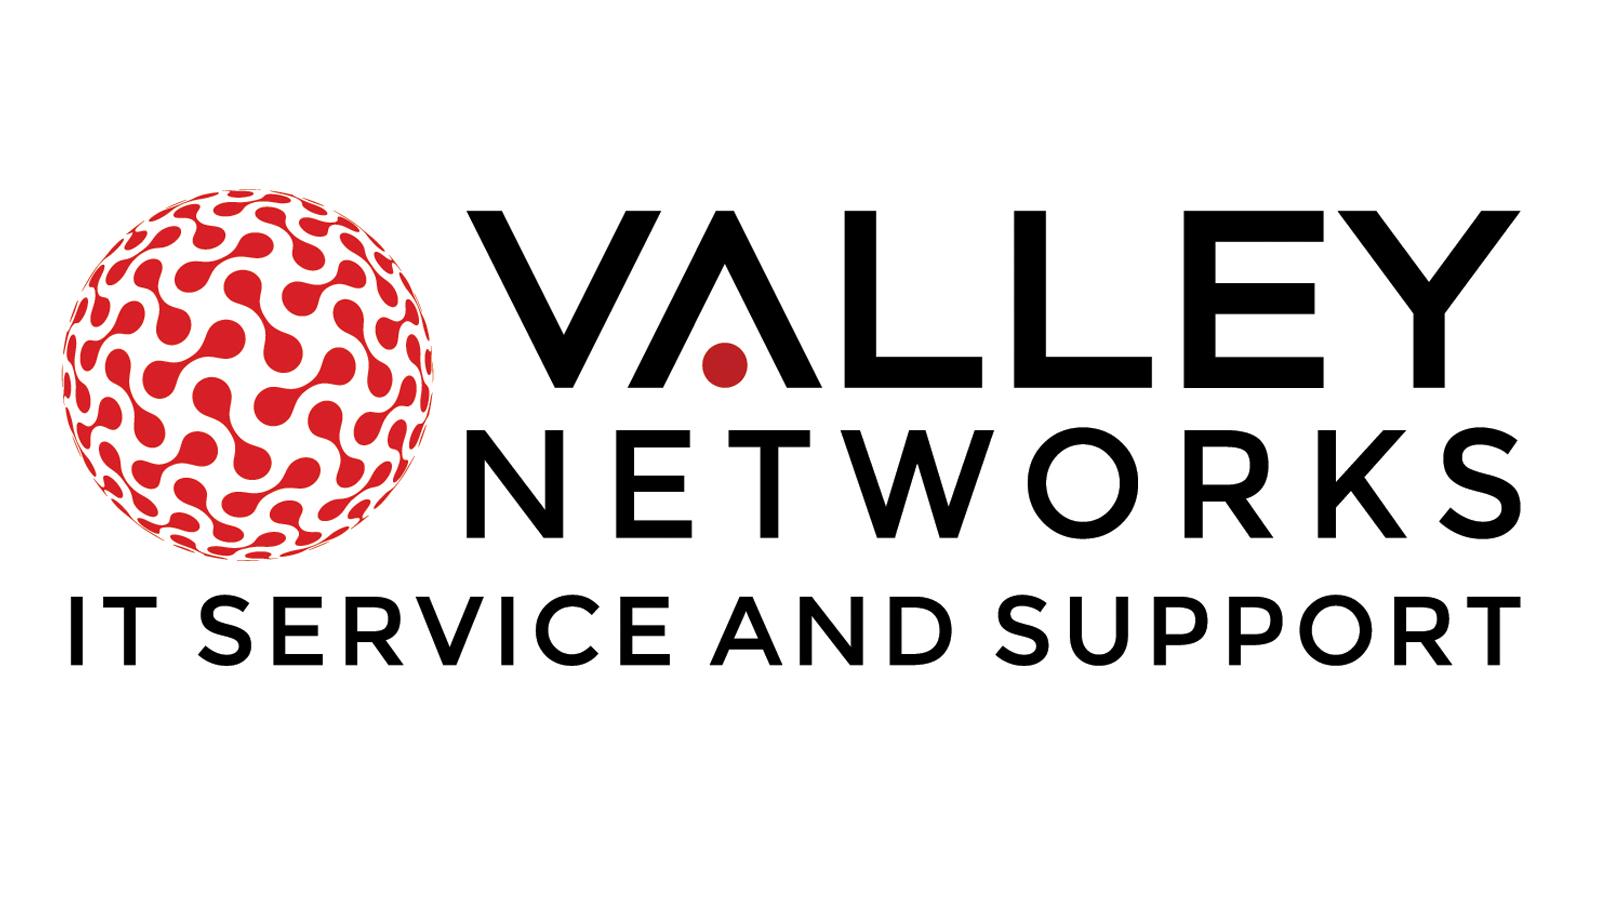 Valley Networks profile on Qualified.One